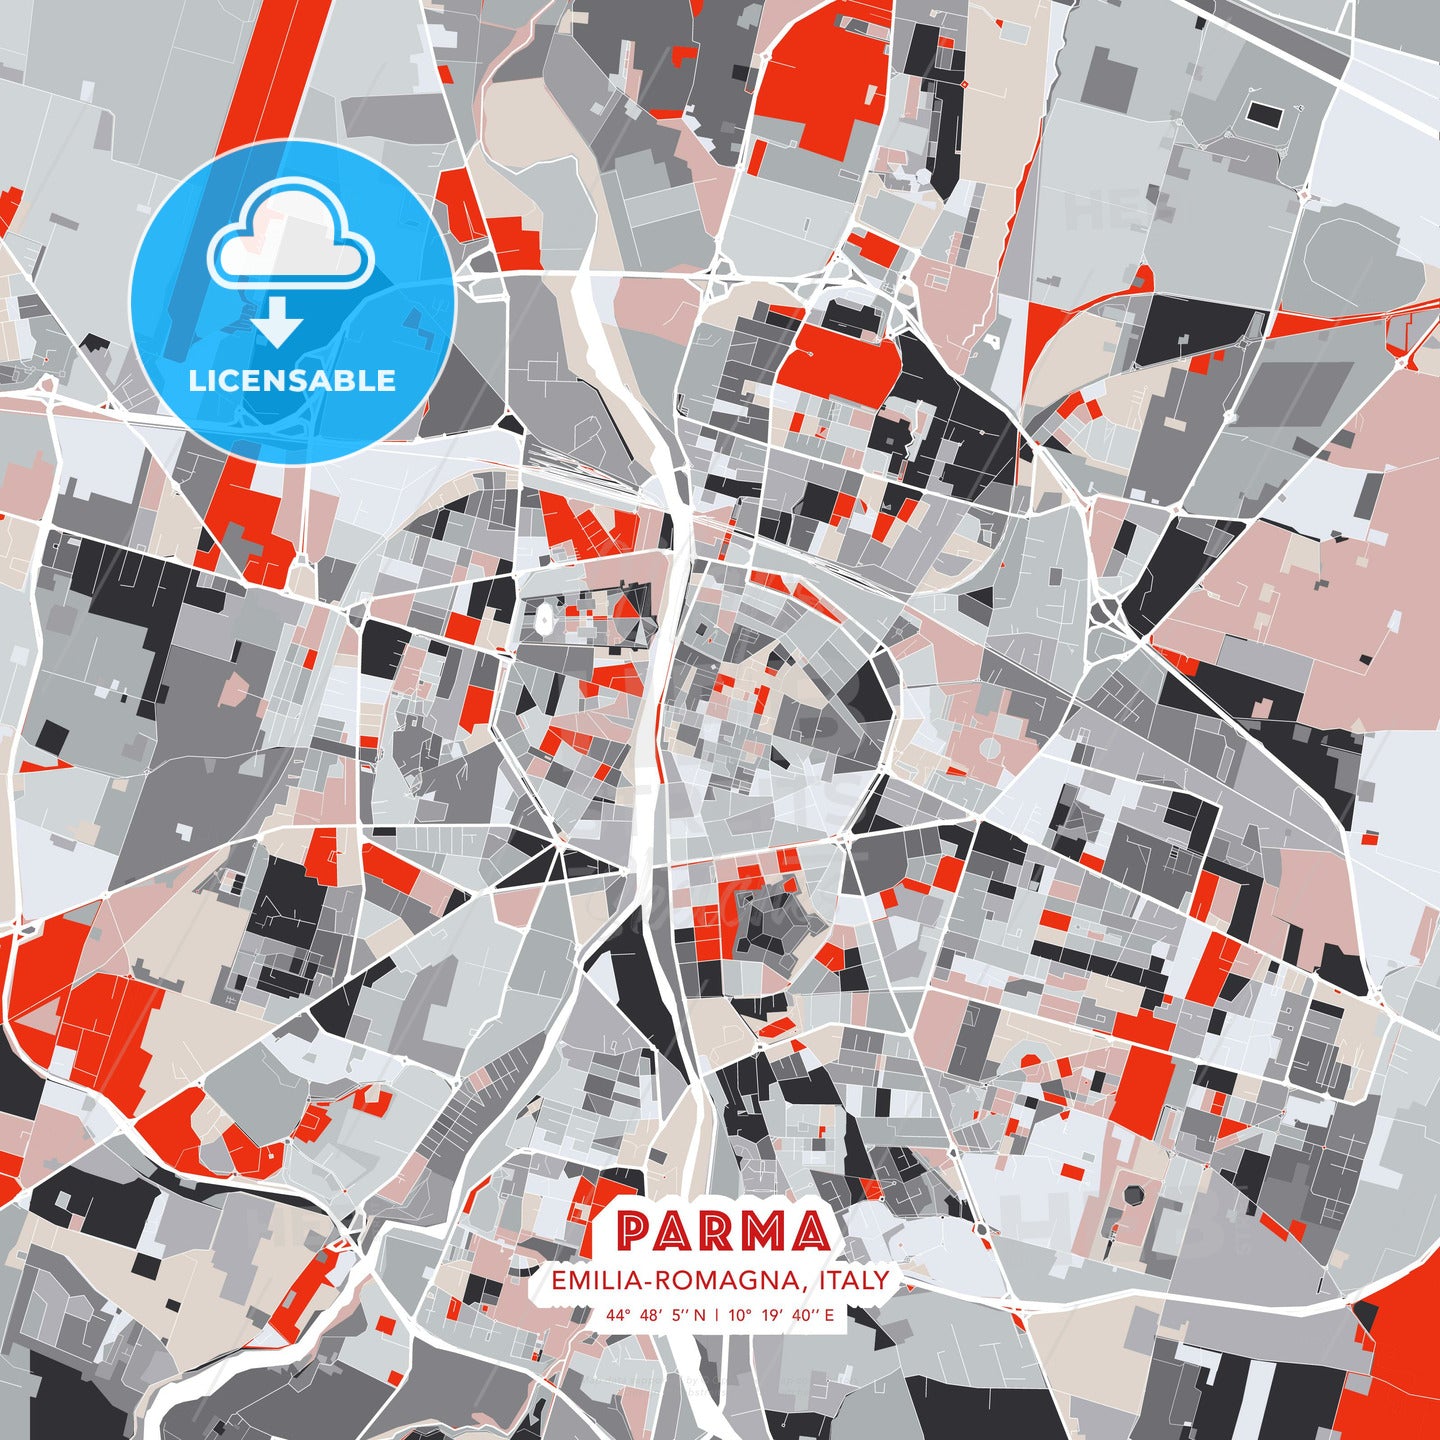 Parma, Emilia-Romagna, Italy, modern map - HEBSTREITS Sketches